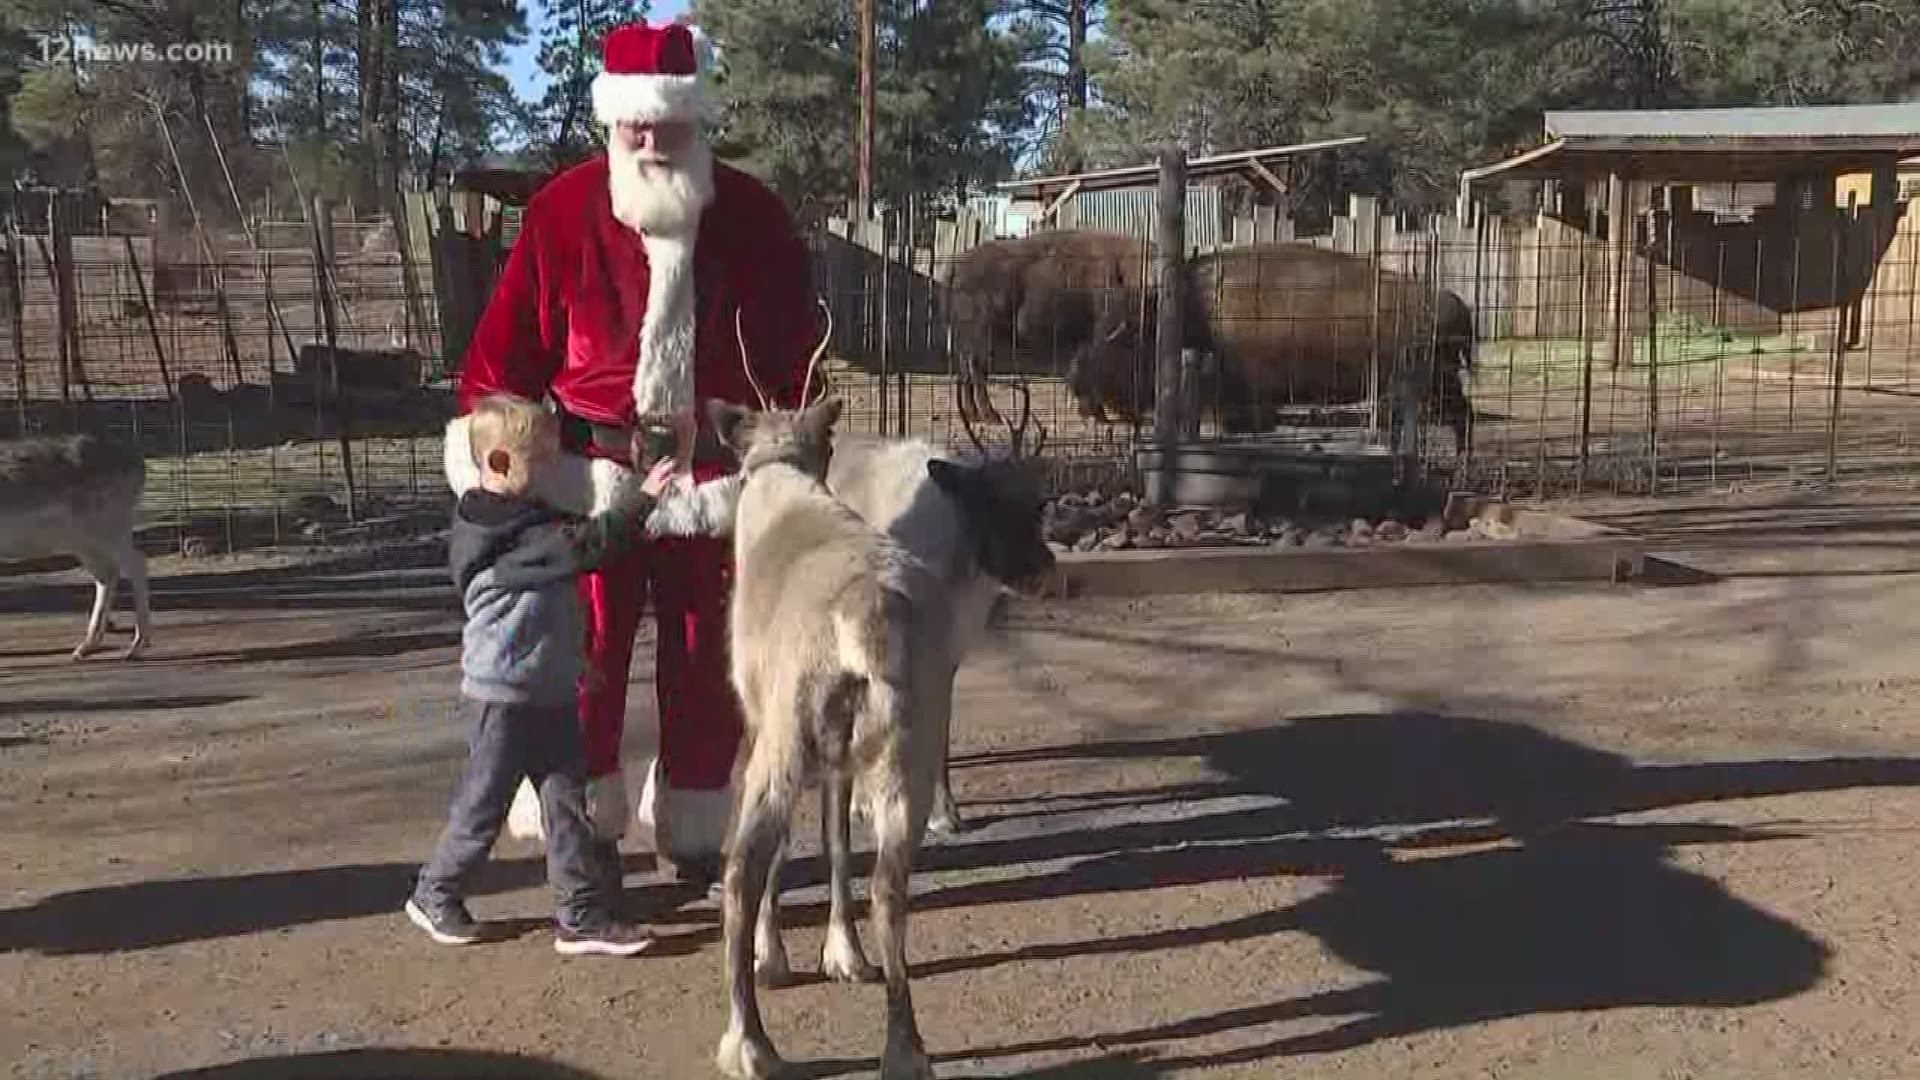 Families can get up close to some of Santa's reindeer's at the Grand Canyon Deer Farm in Williams, Arizona. 